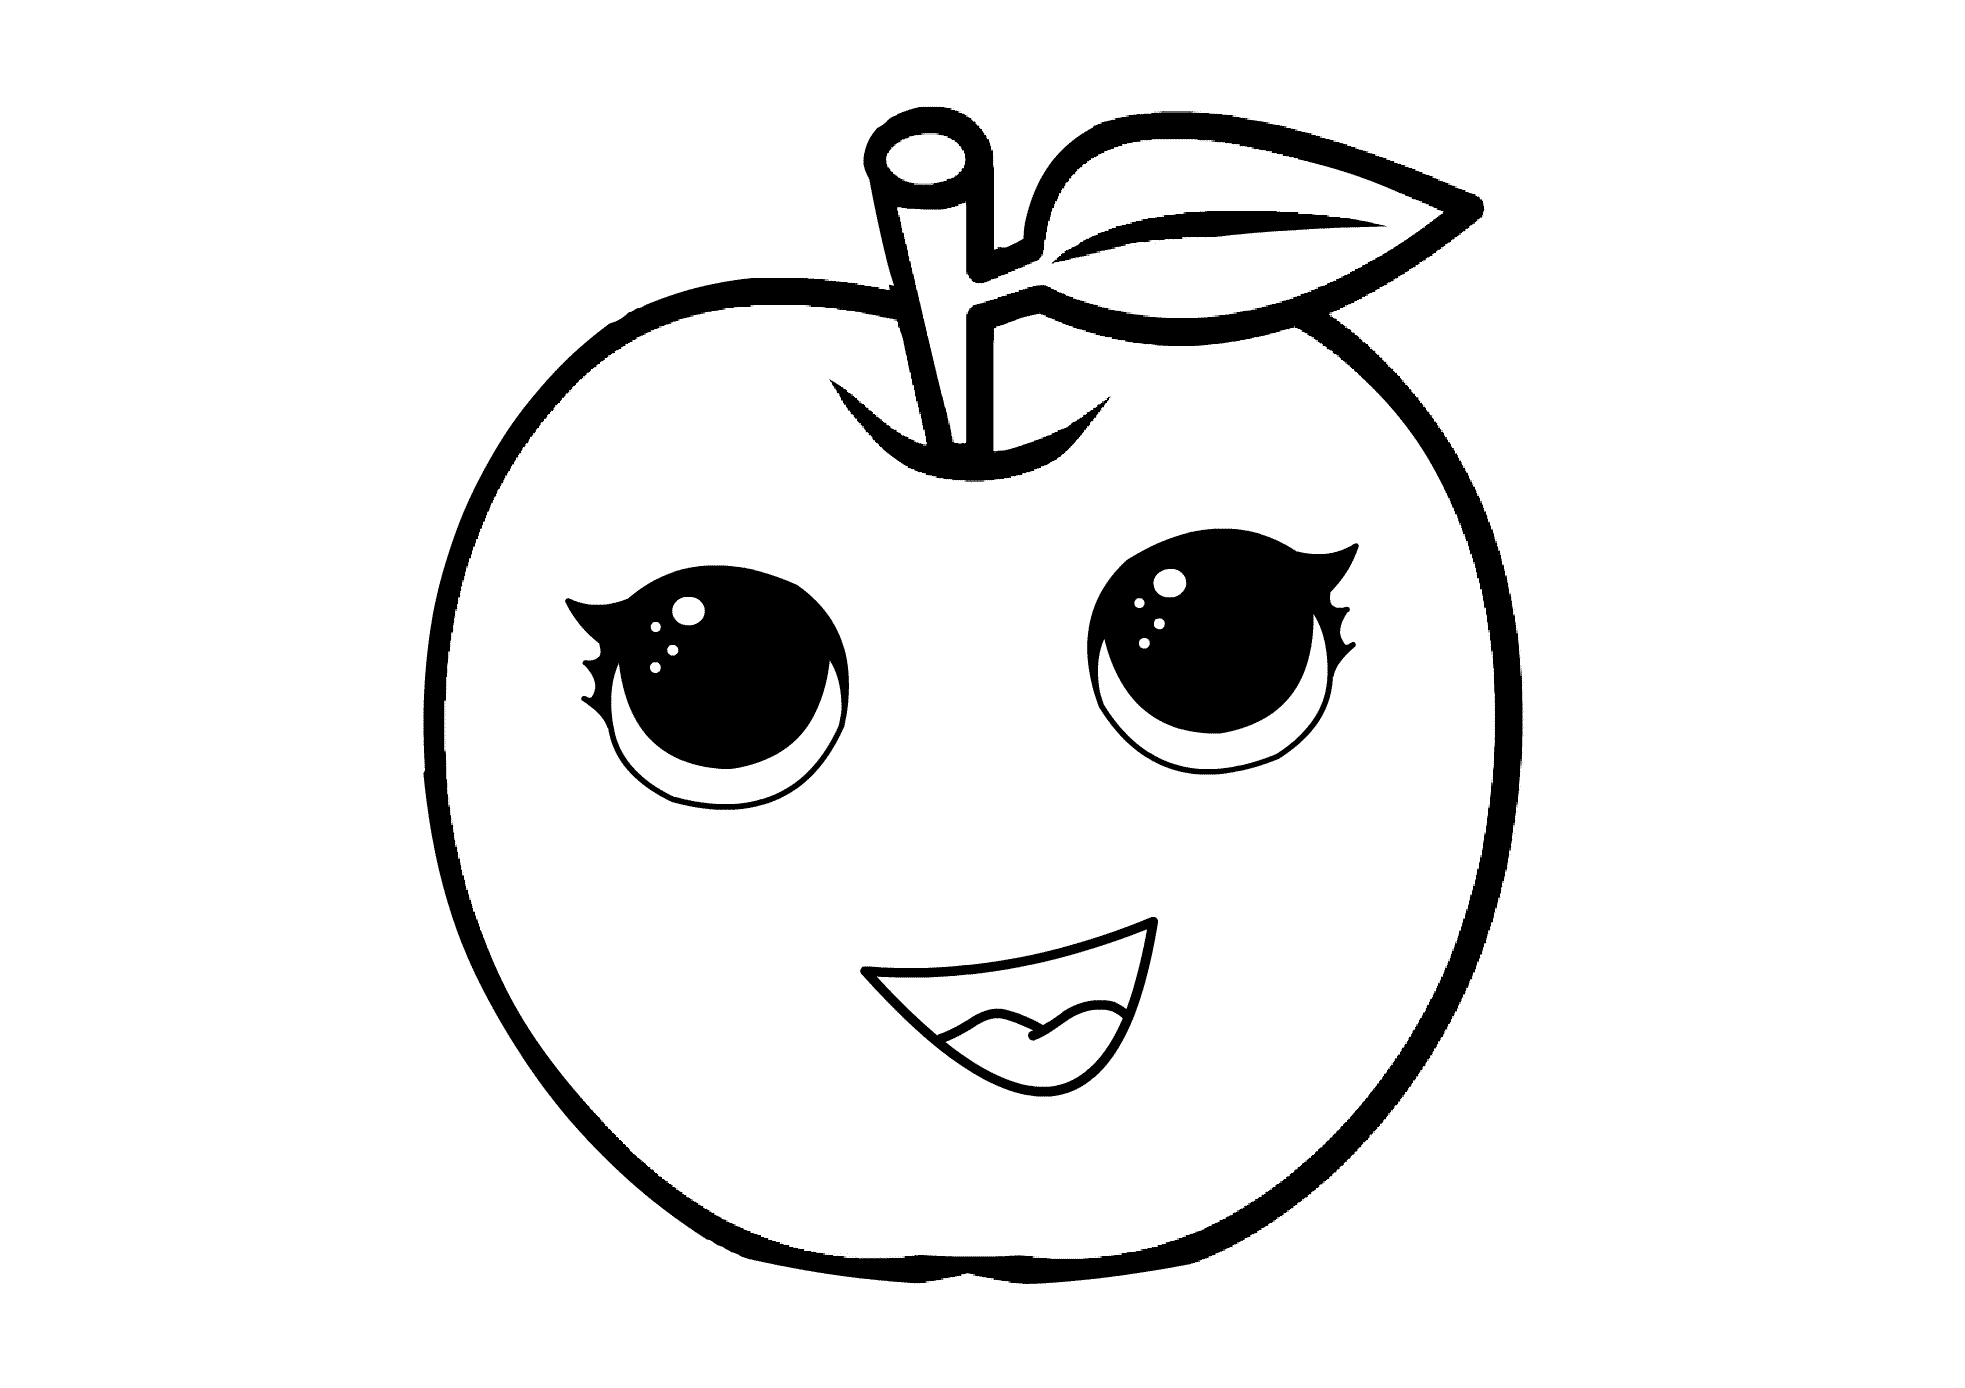 Download Printable Apple Coloring Pages: Easy Fruits PDFs - Print Color Craft